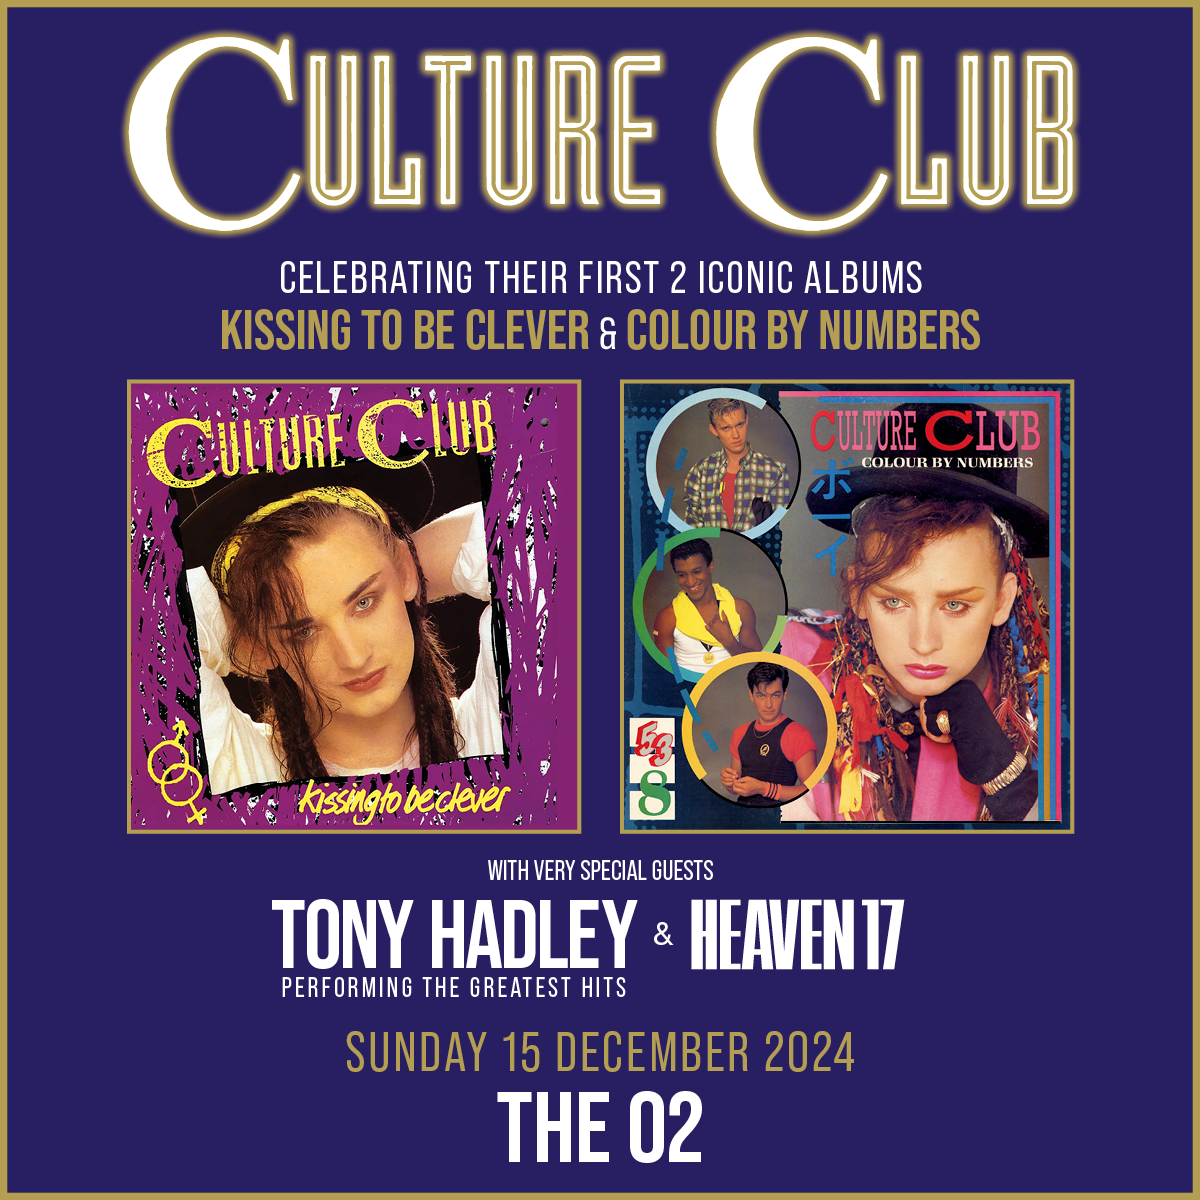 Artwork for Culture Club's show at The O2